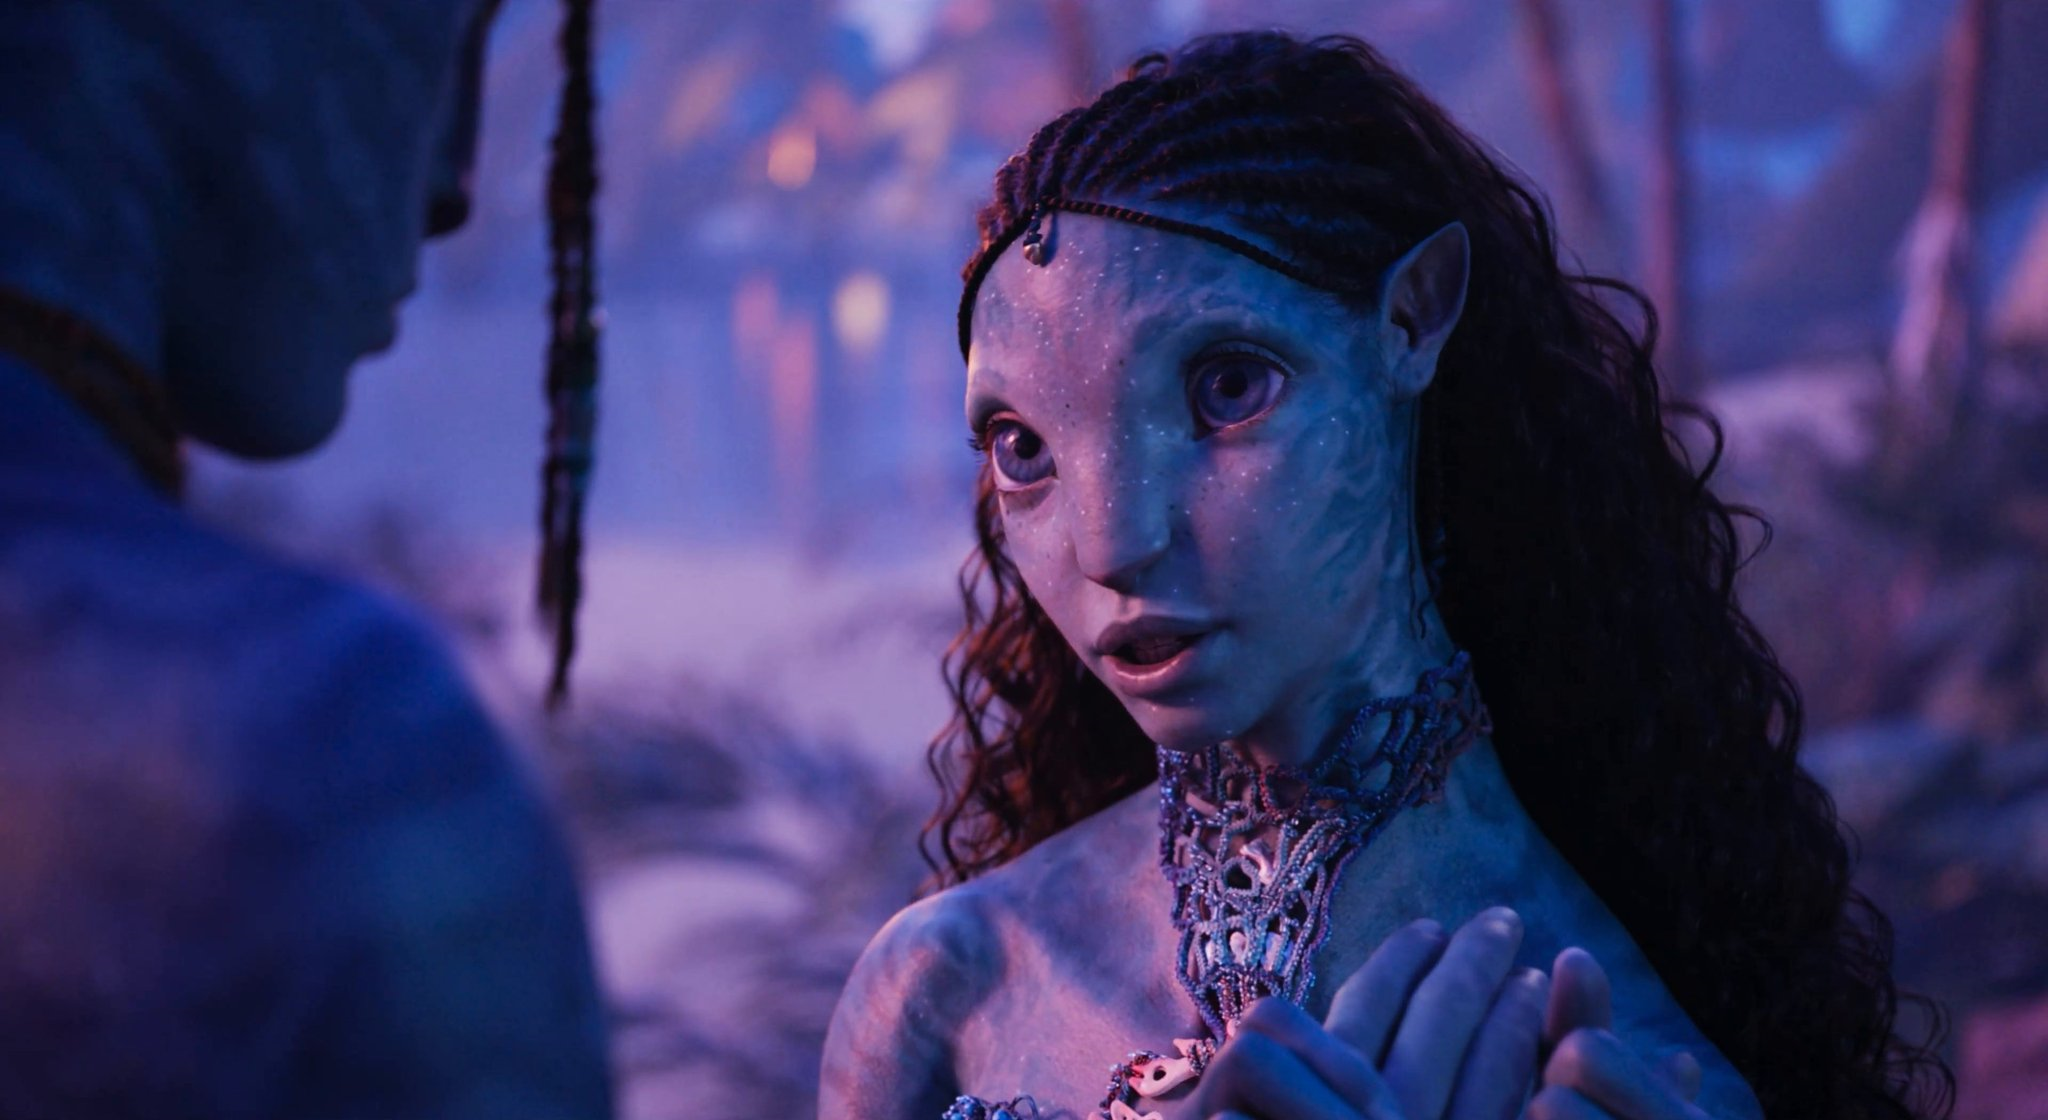 The Insane Film Technology Behind 'Avatar: The Way of Water